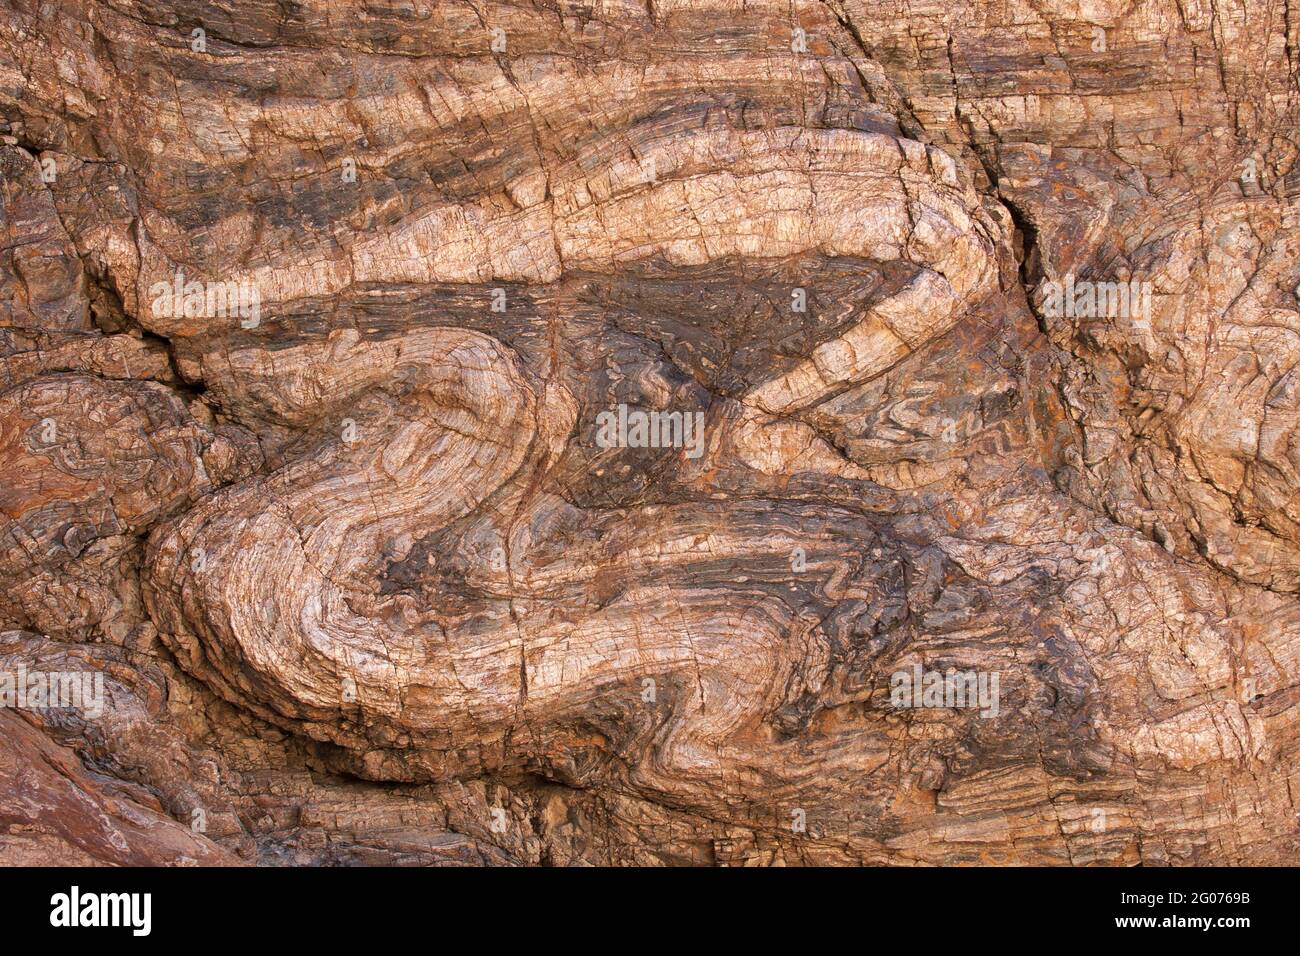 Ductiley deformed Proterozoic basement gneiss, southeastern California, USA. View is about 2 meters across. Stock Photo